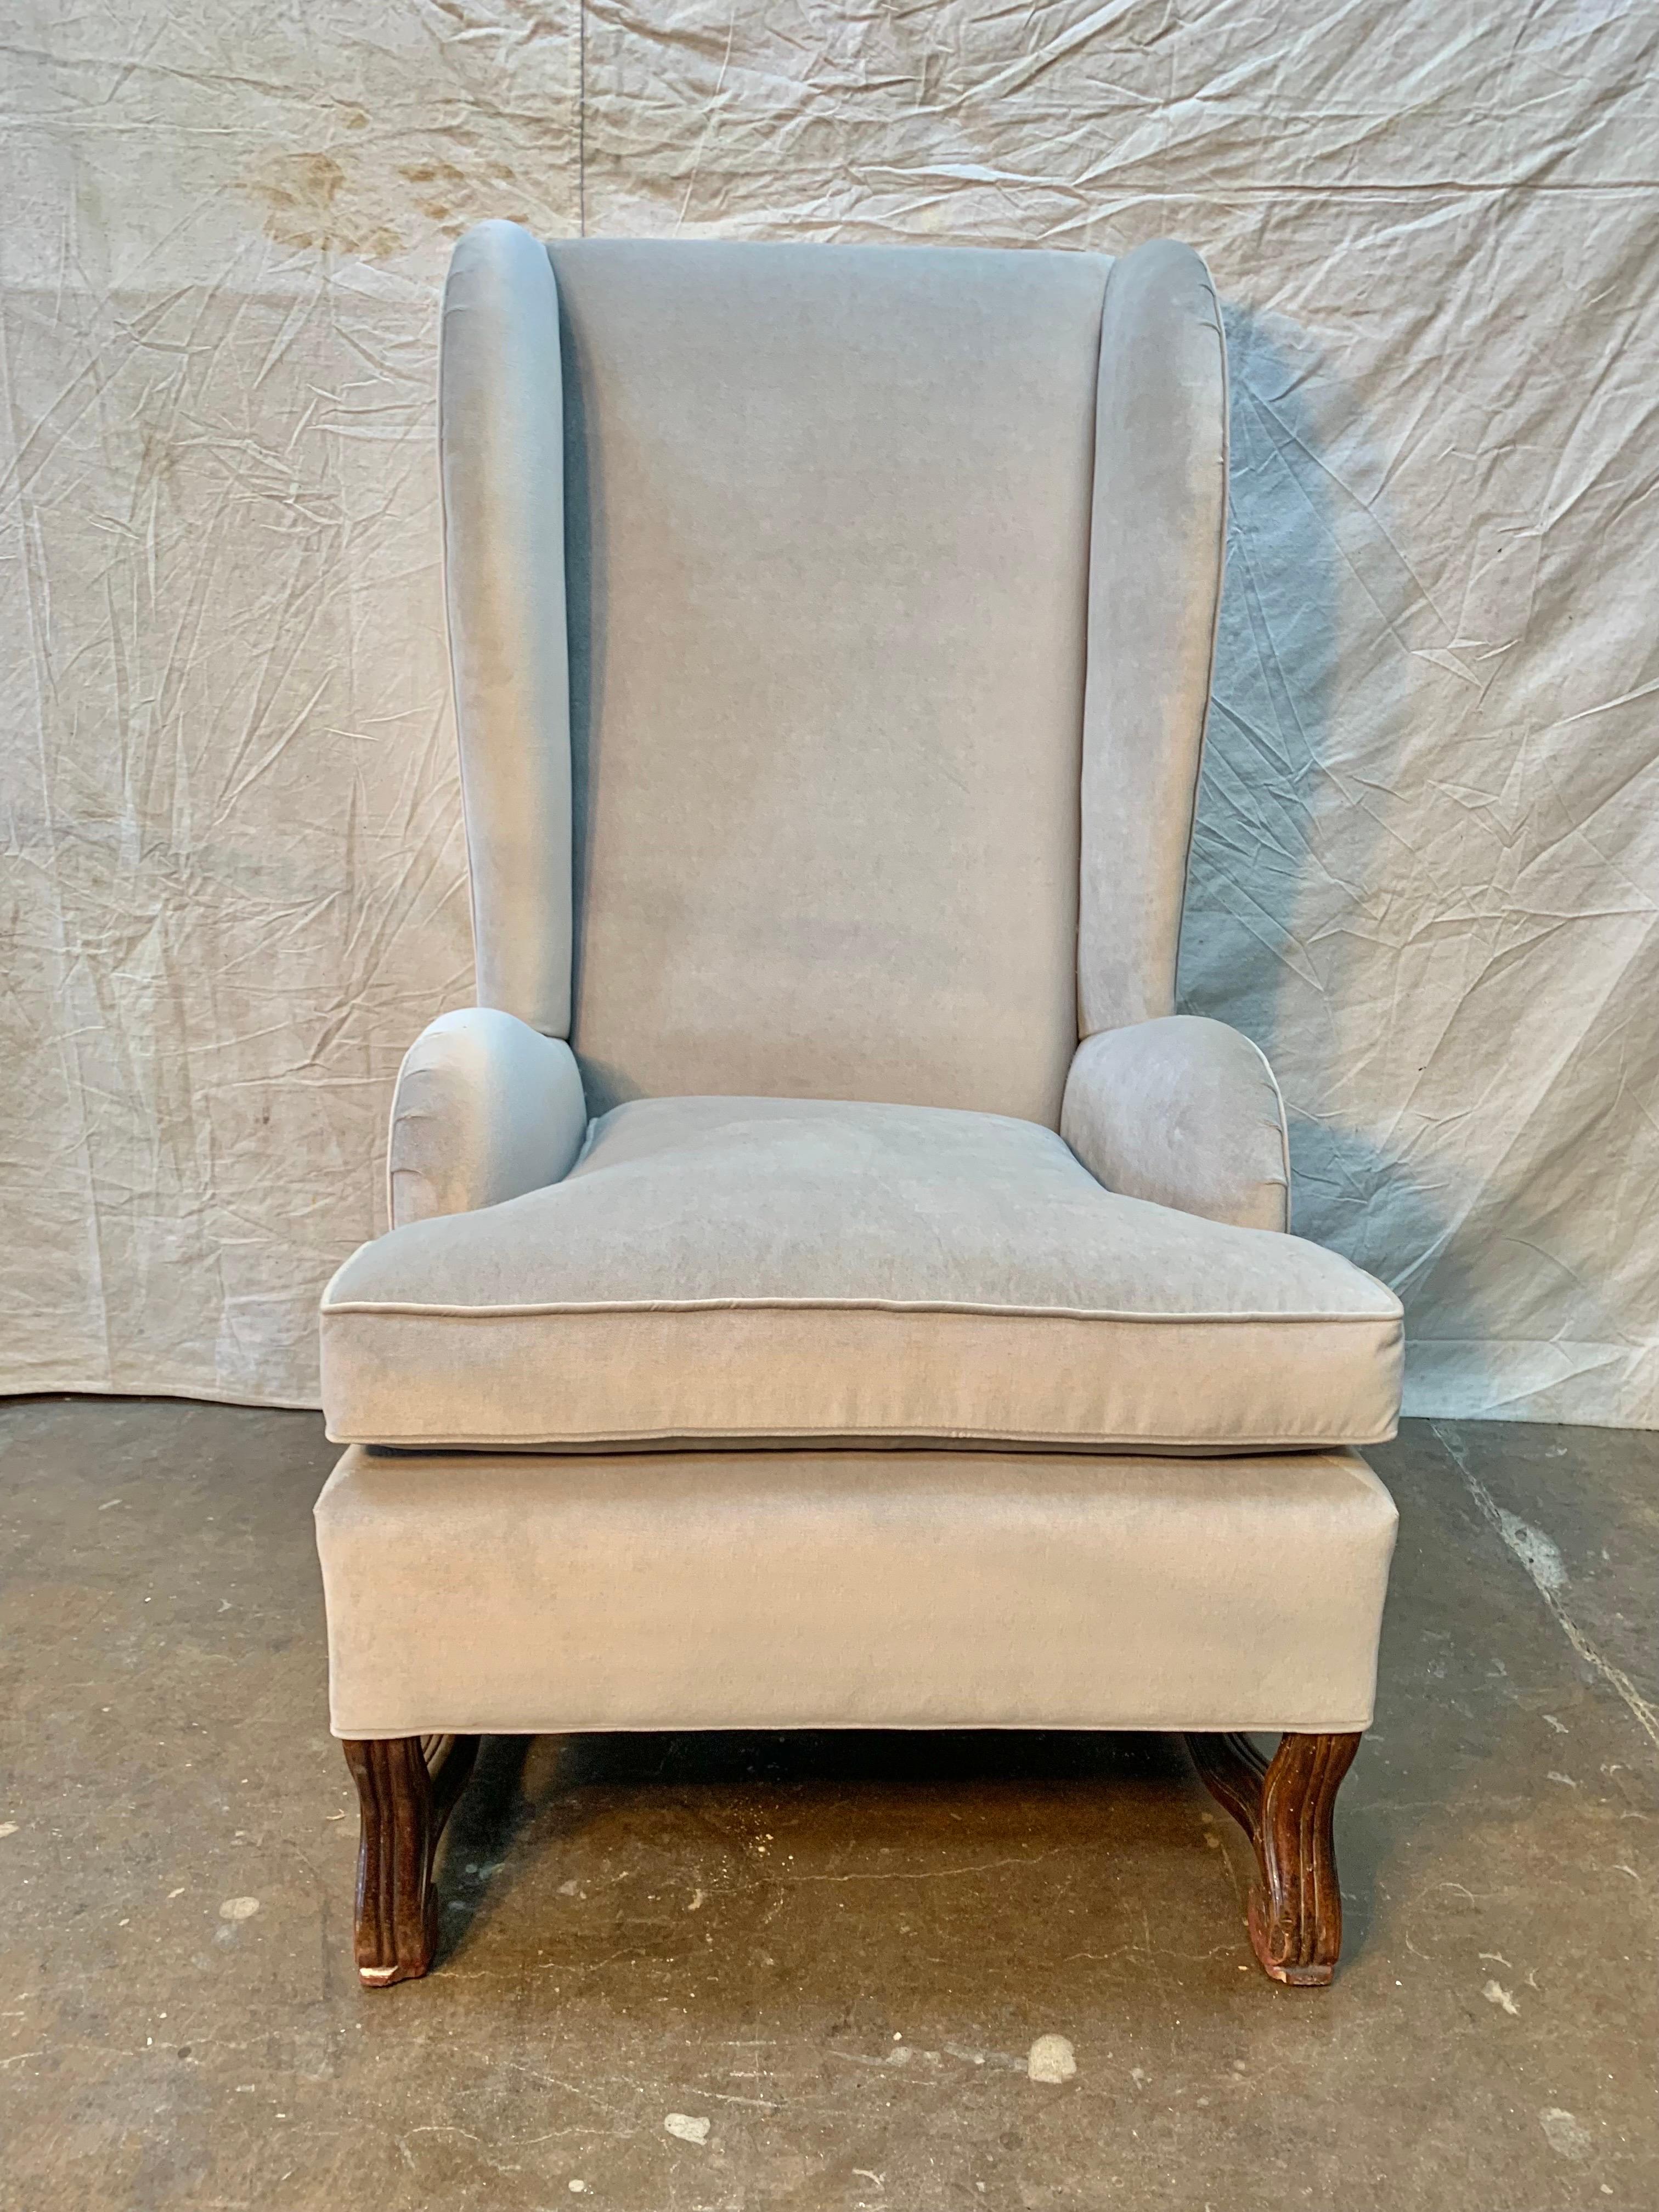 19th Century French Walnut Wingback Chair With Os De Mouton Base, New Upholstery In Good Condition For Sale In Burton, TX